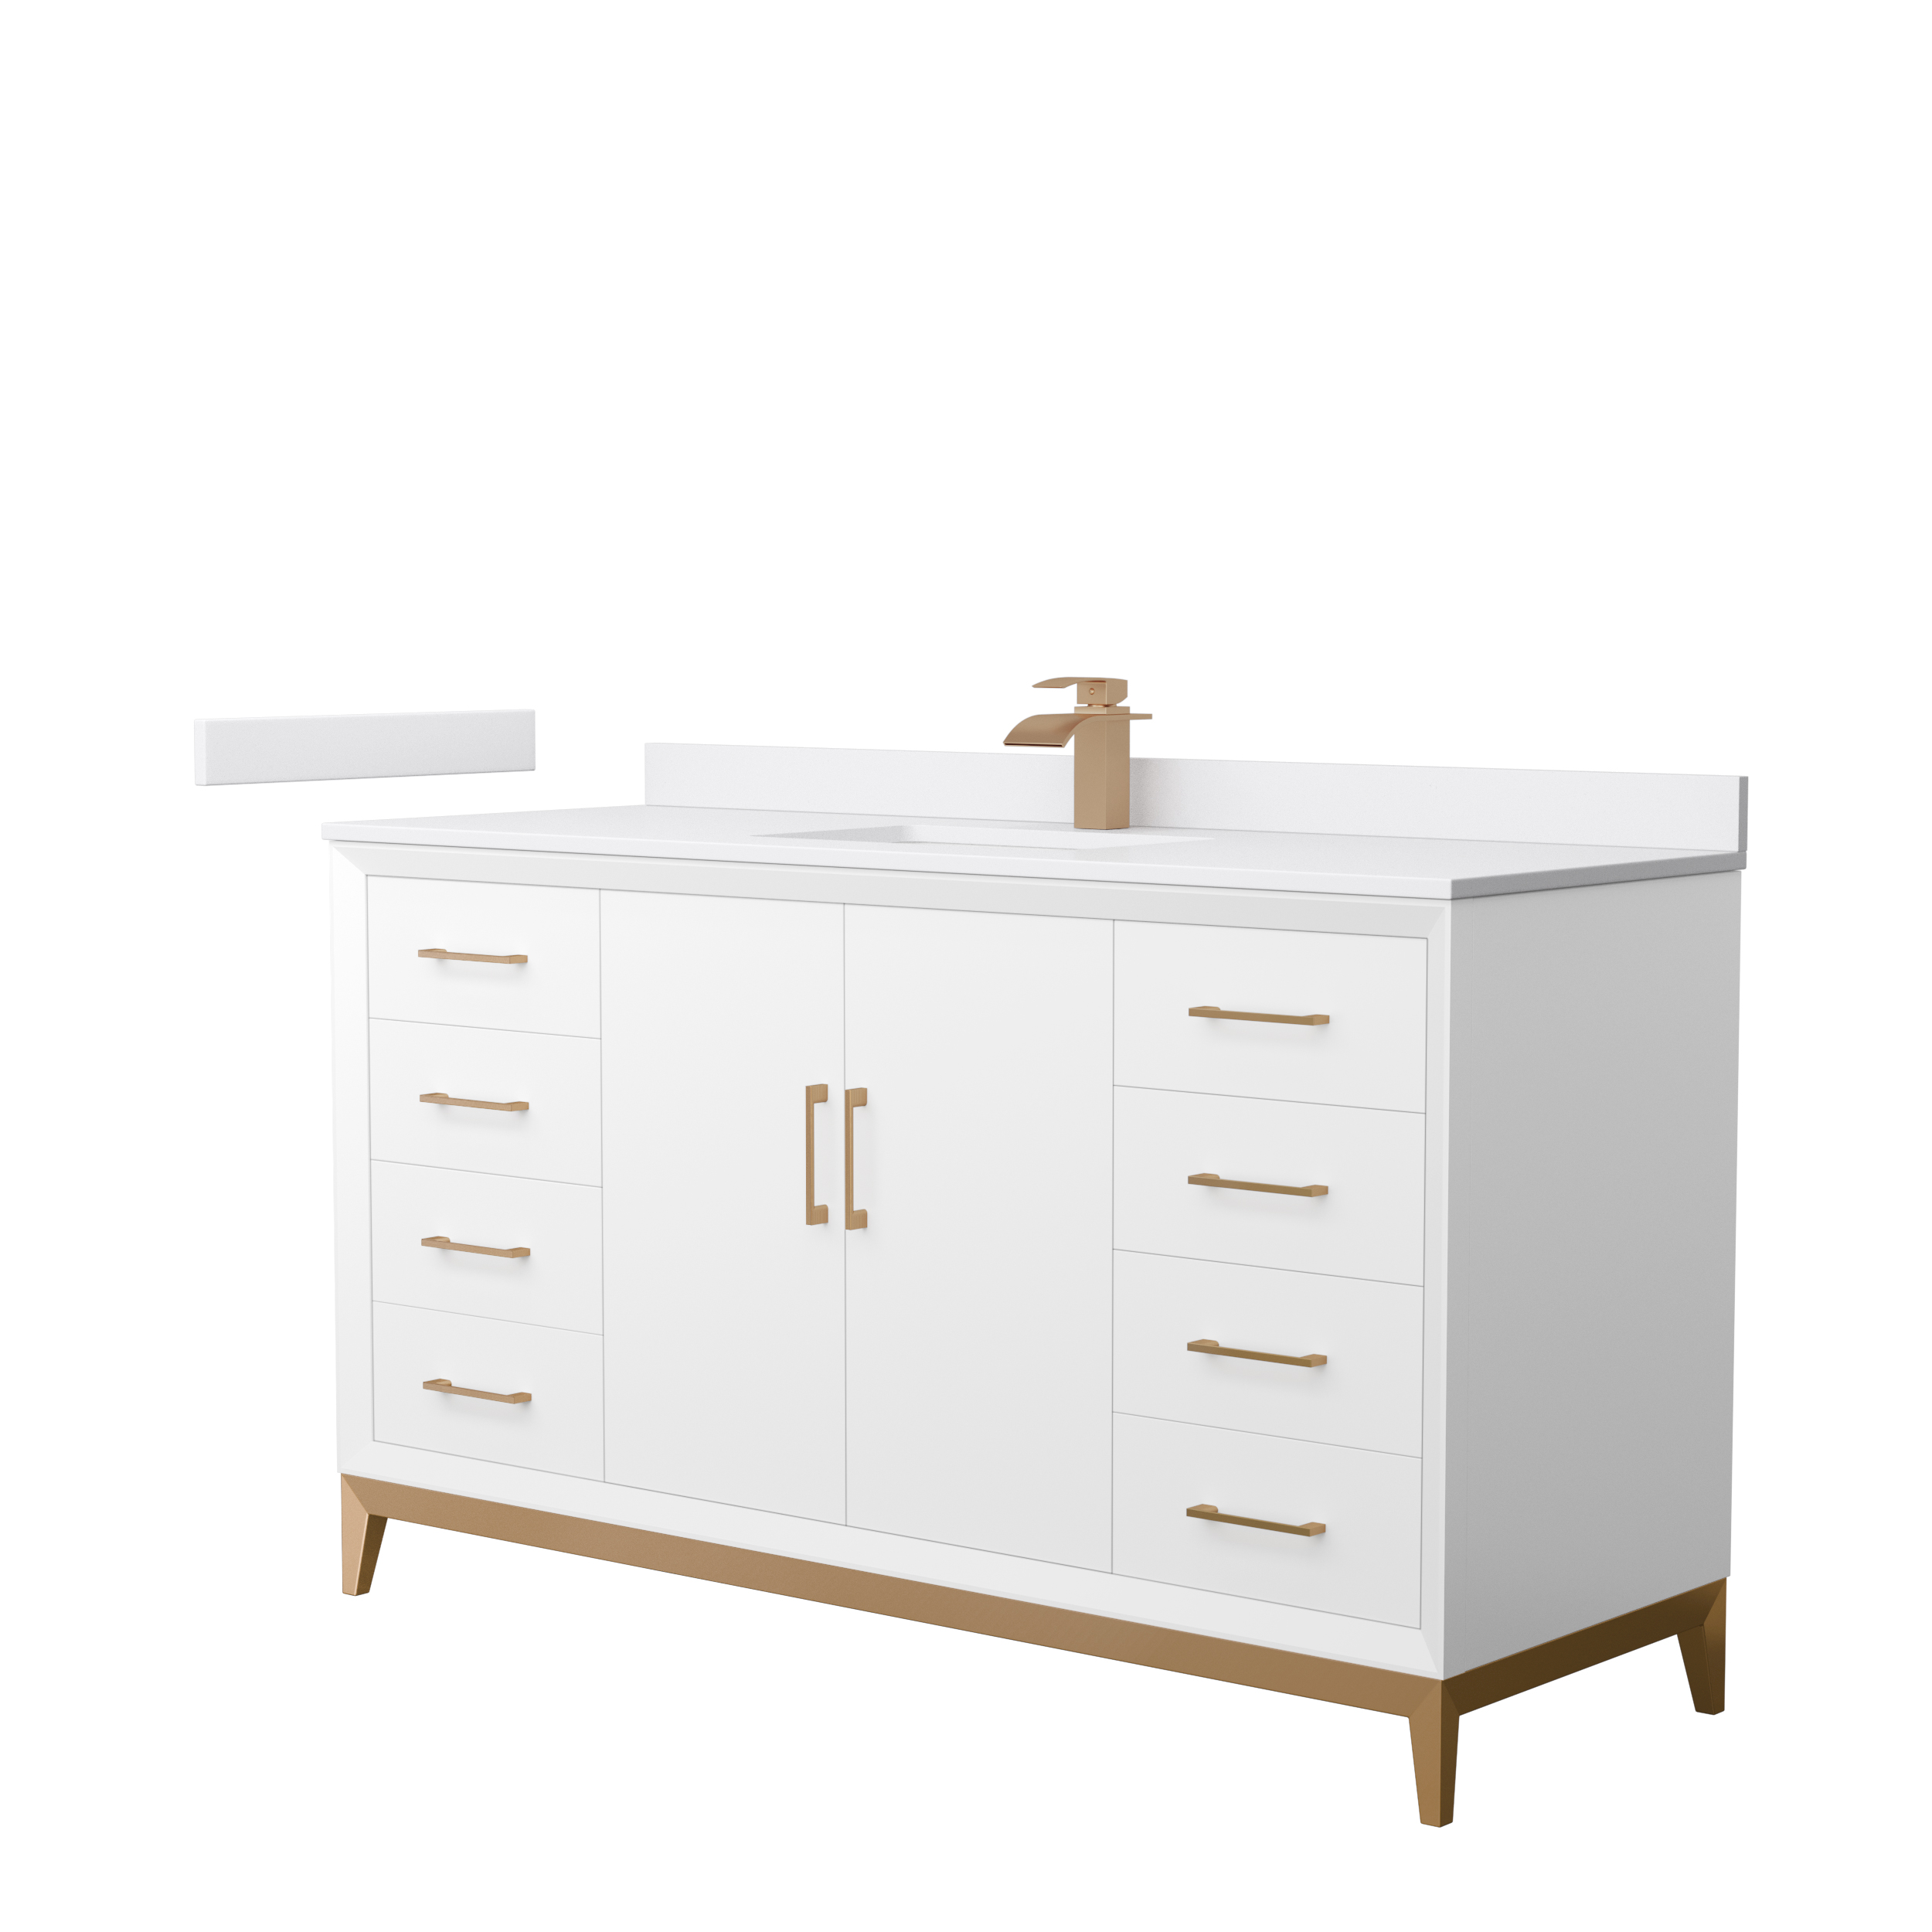 Amici 60" Single Vanity with optional Cultured Marble Counter - White WC-8181-60-SGL-VAN-WHT-